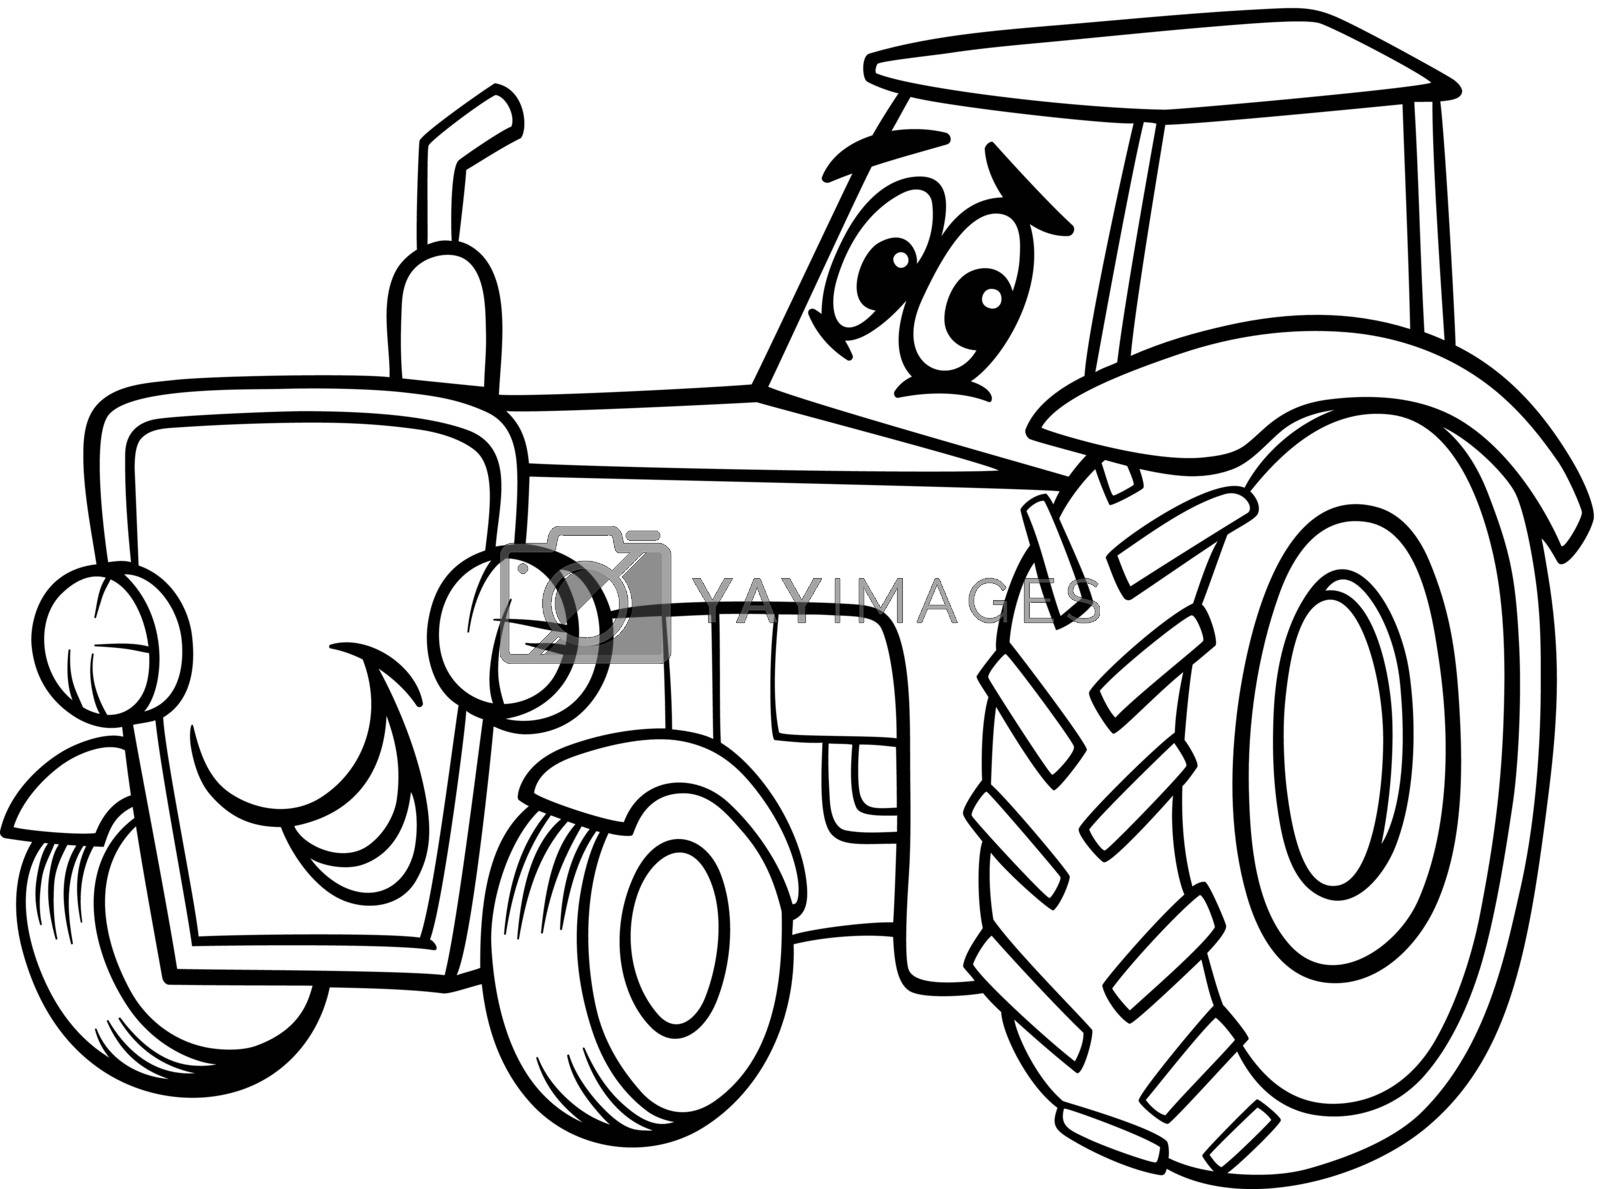 Royalty Free Vector | tractor cartoon for coloring book by izakowski